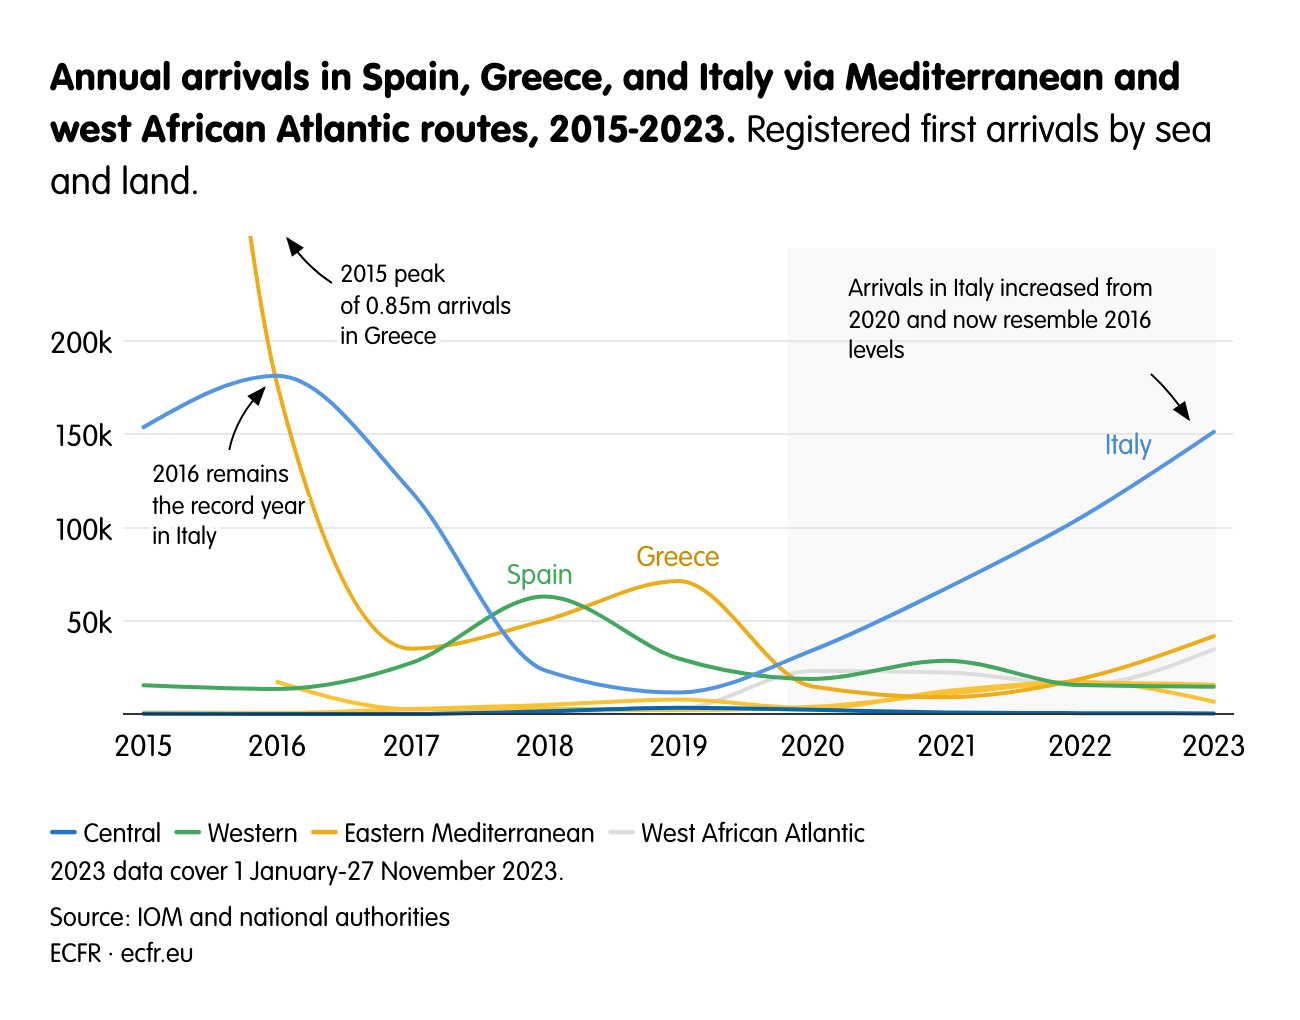 Annual arrivals in Spain, Greece, and Italy via Mediterranean and west African Atlantic routes, 2015-2023.